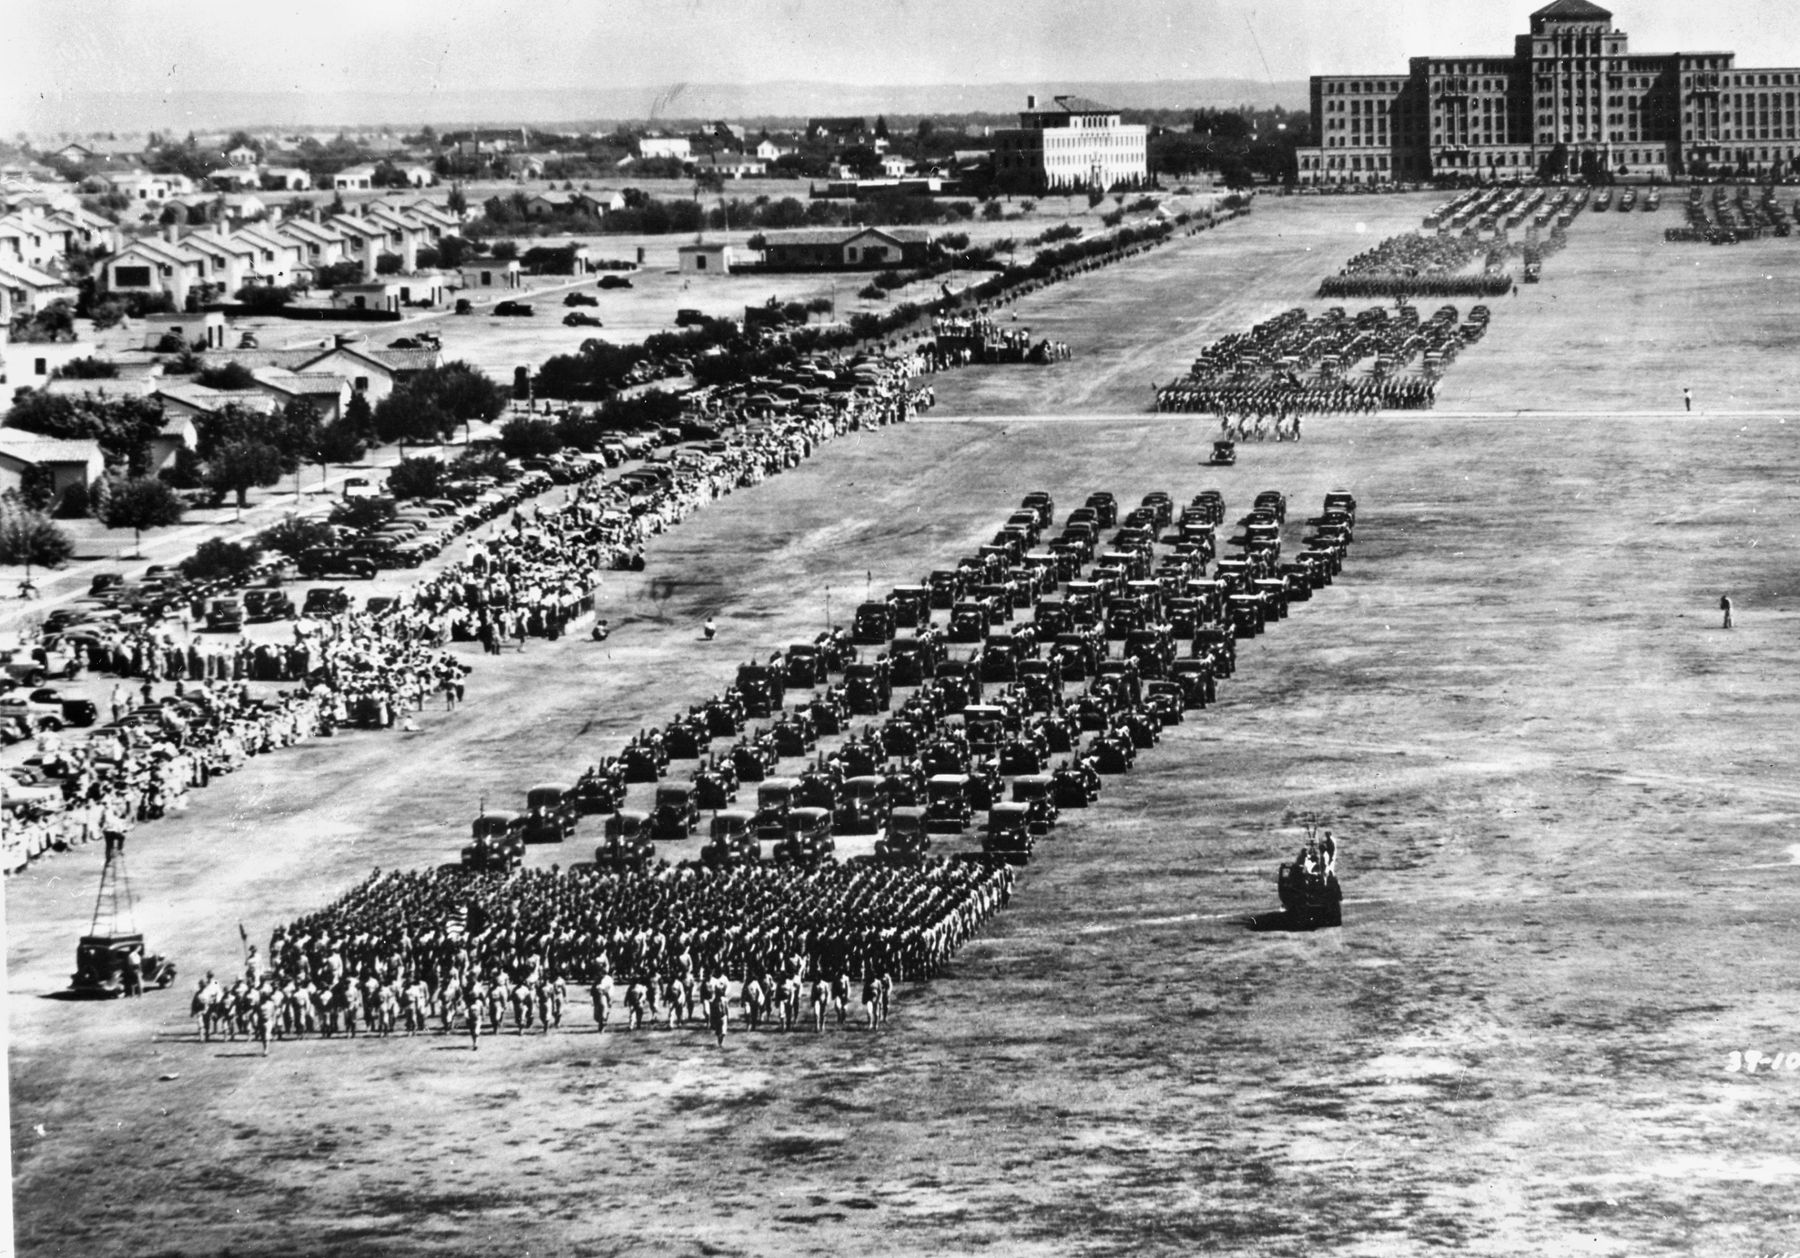 A division of the U.S. Army is shown on parade at Fort Sam Houston, Texas, in 1939. By that time, Army divisions such as this one were composed of three regiments.